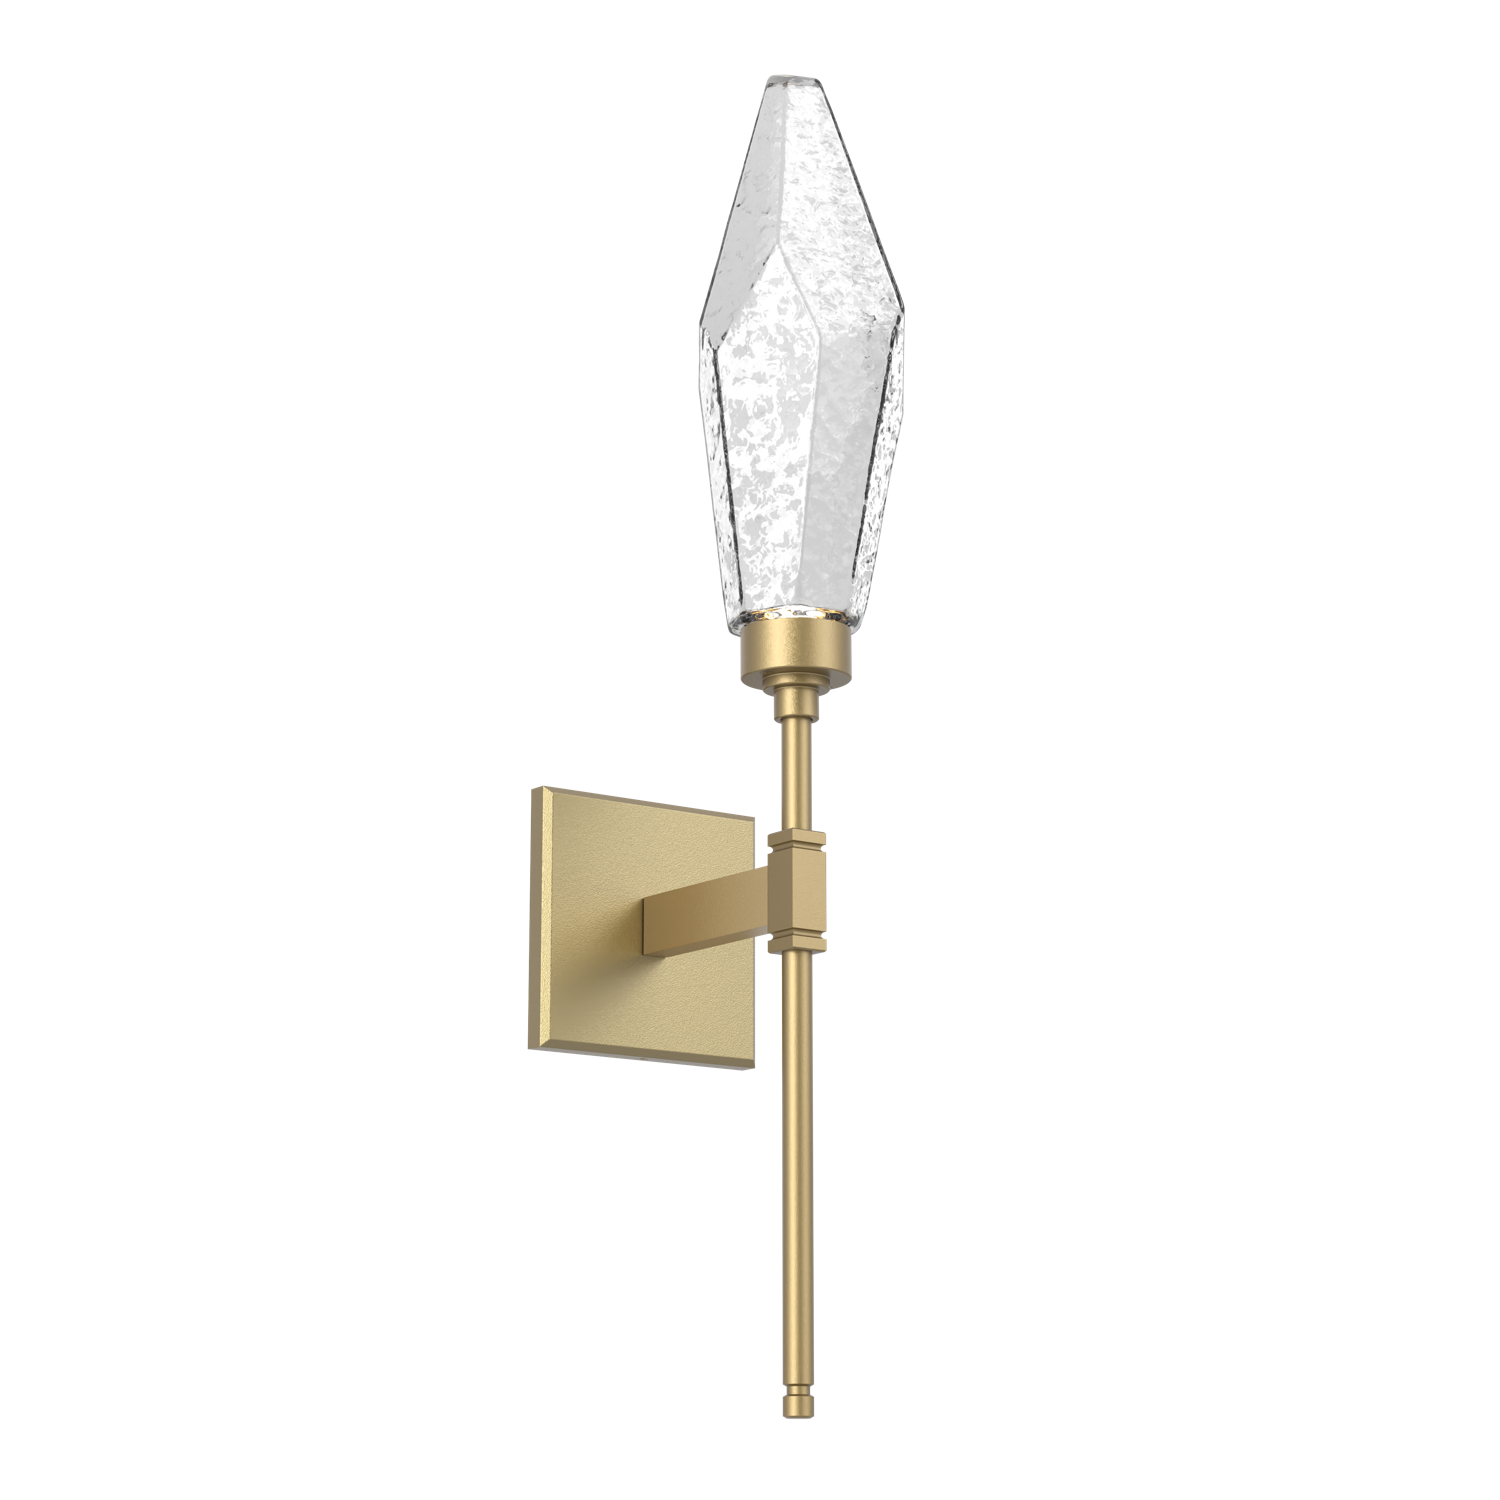 IDB0050-07-GB-CC-Hammerton-Studio-Rock-Crystal-belvedere-wall-sconce-with-gilded-brass-finish-and-clear-glass-shades-and-LED-lamping